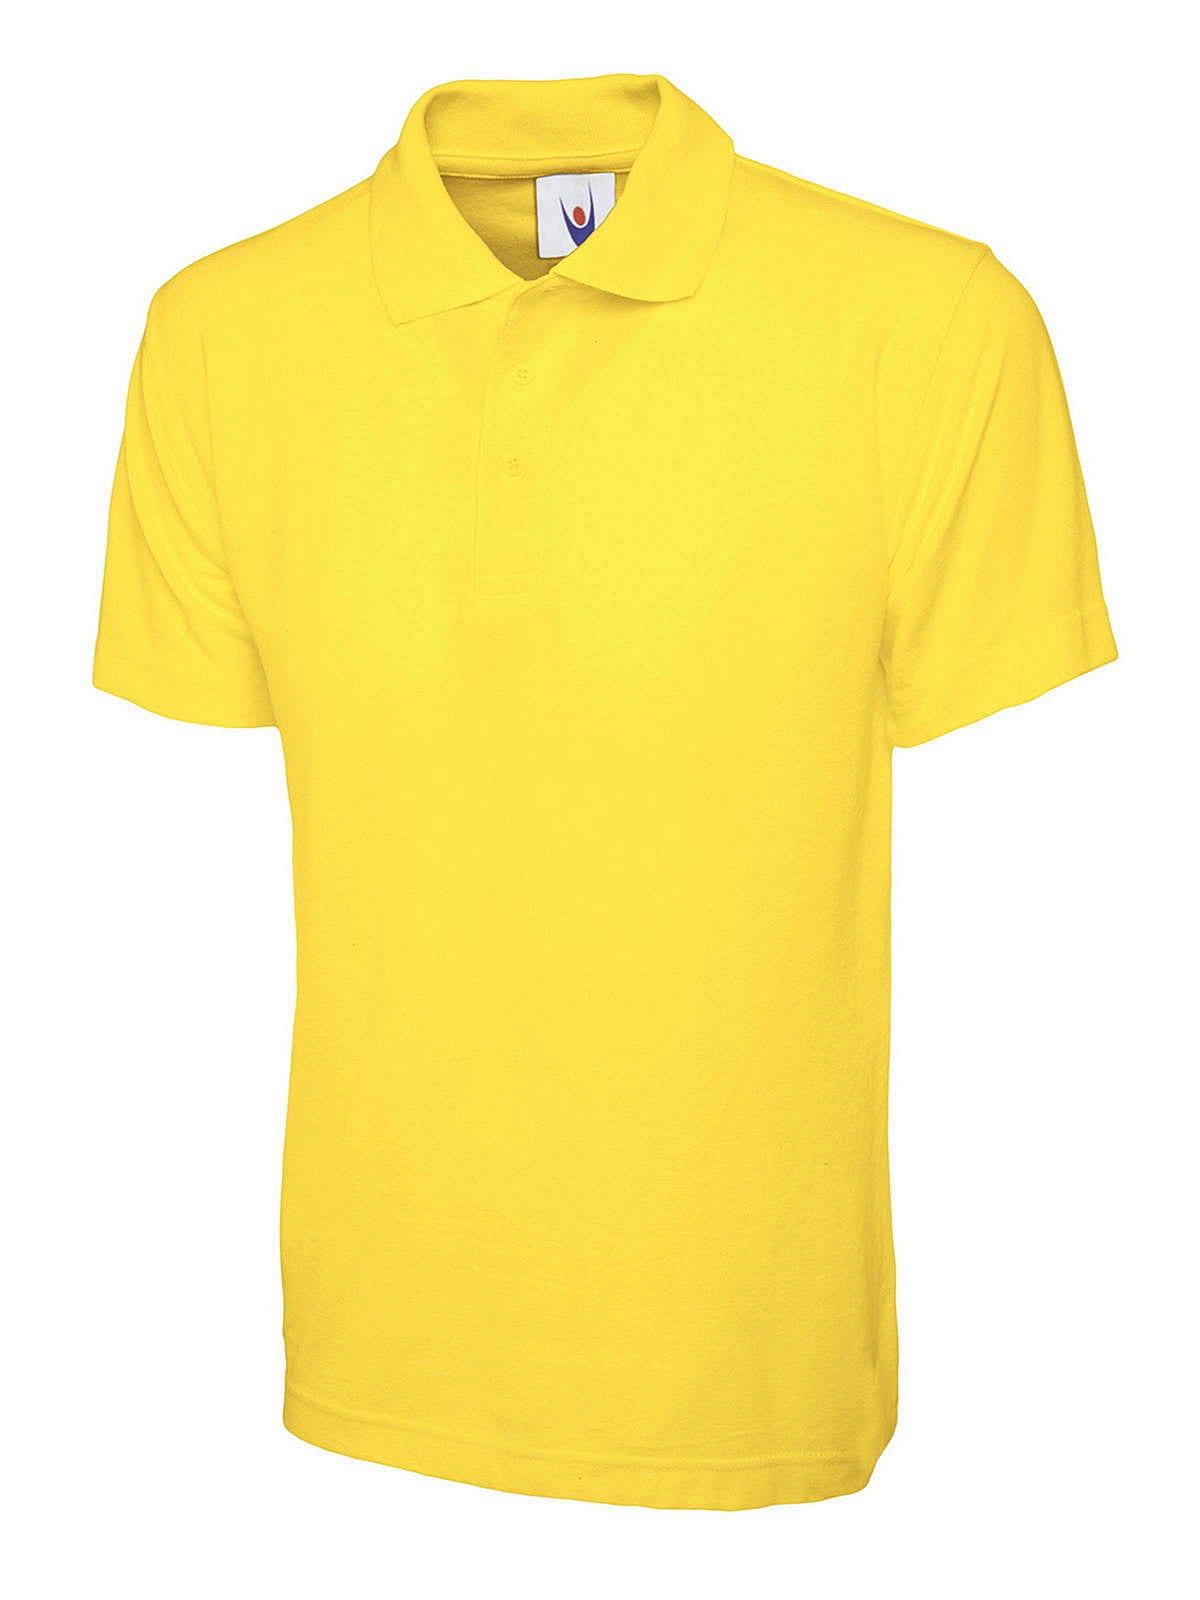 Uneek 220GSM Classic Polo Shirt in Yellow (Product Code: UC101)